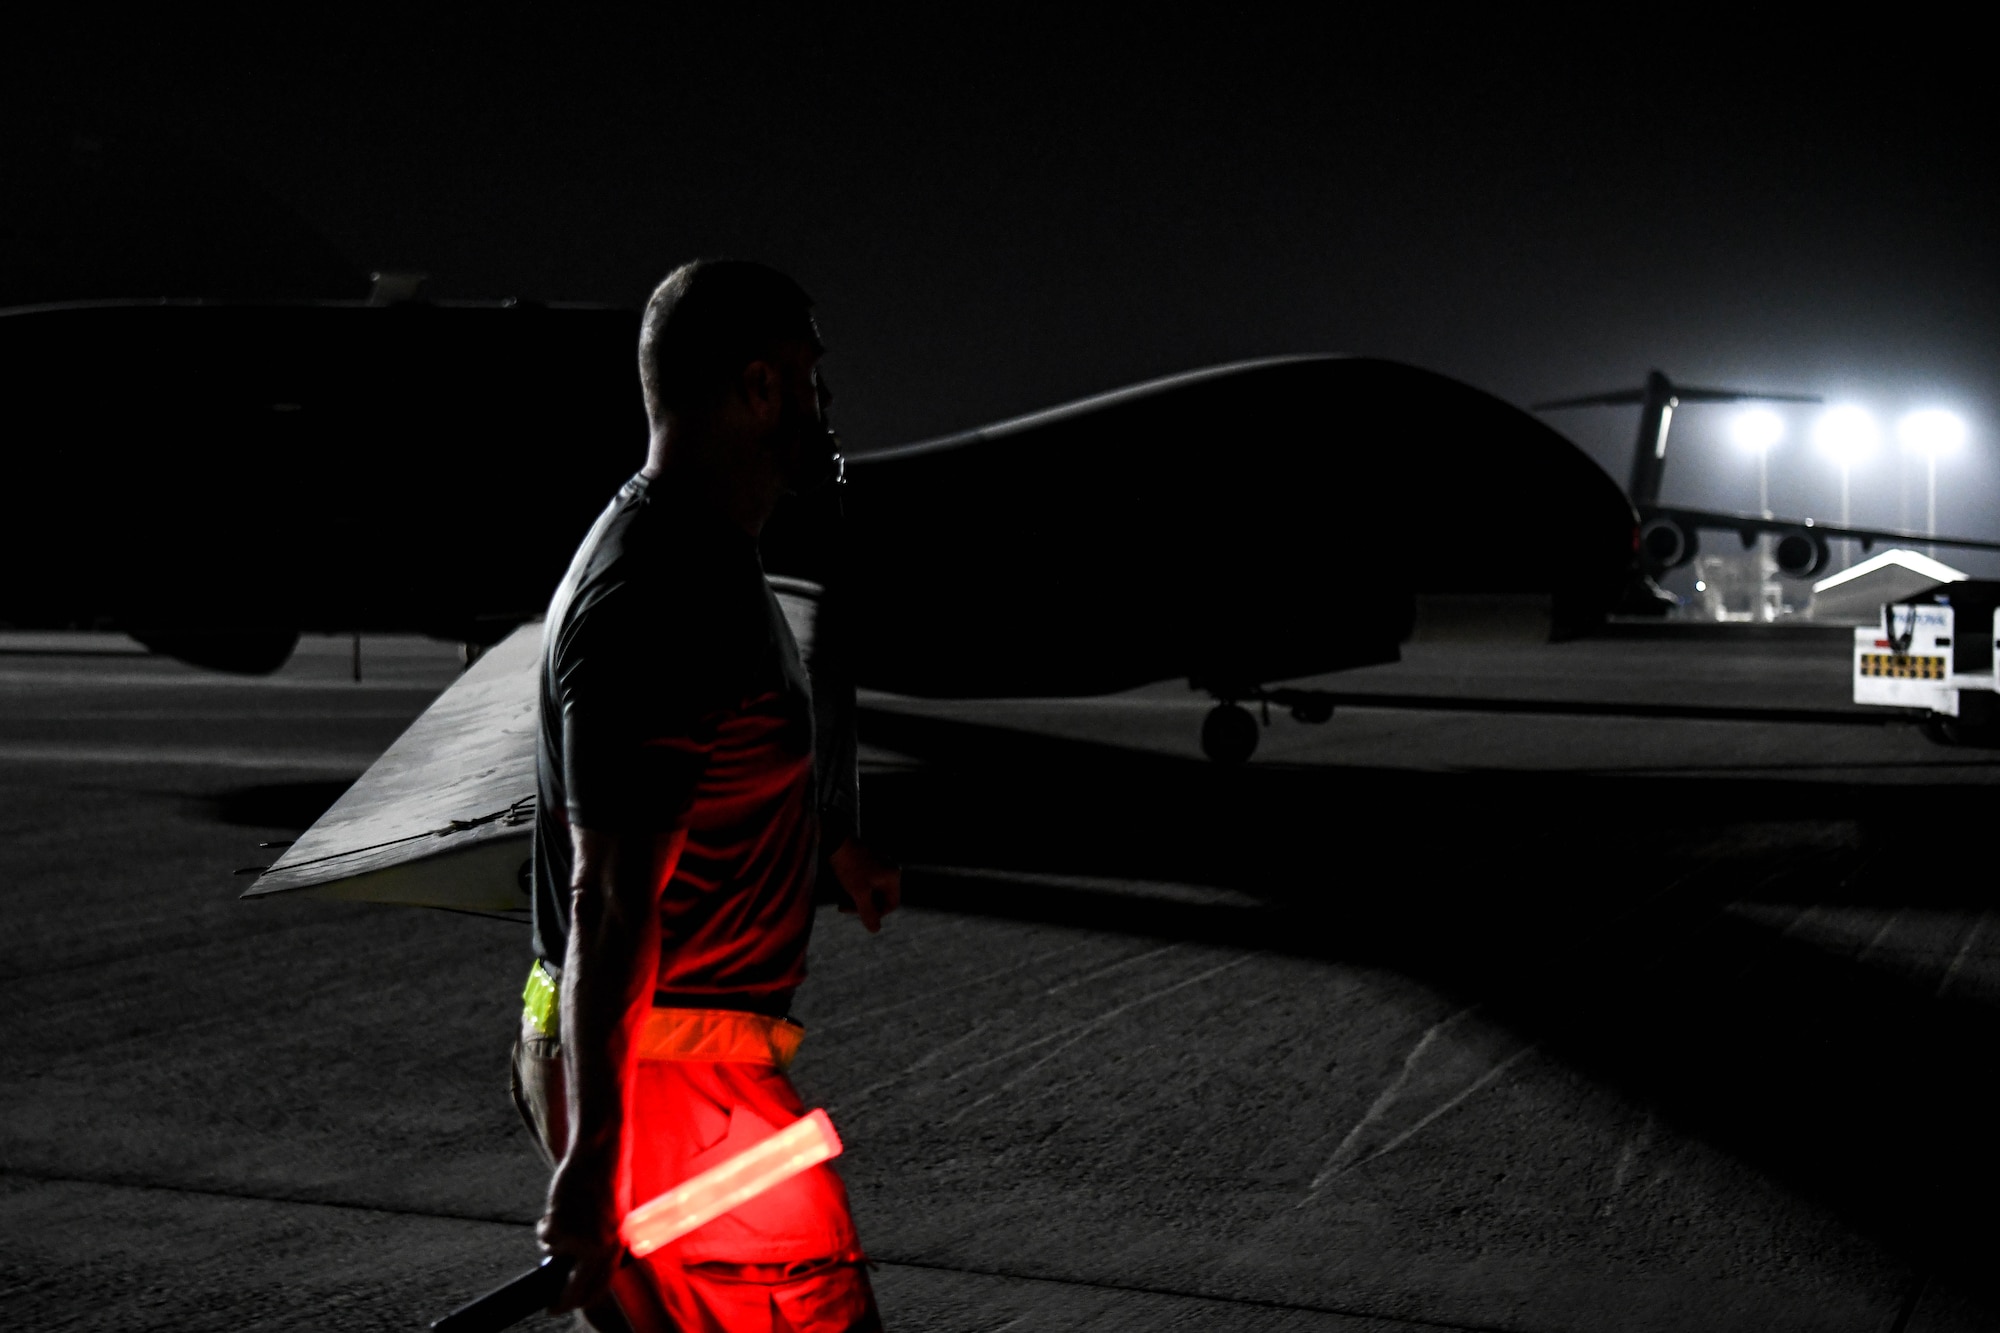 A Northrup Grumman contractor escorts the last U.S. Navy RQ-4 Global Hawk, attached to the Broad Area Maritime Surveillance Demonstrator mission, onto the flight line June 16, 2022, at Al Dhafra Air Base, United Arab Emirates. The Global Hawk training mission at ADAB was originally scheduled to last 6 months but mission effectiveness and reliability led to an extension of the mission, lasting approximately 13 years.